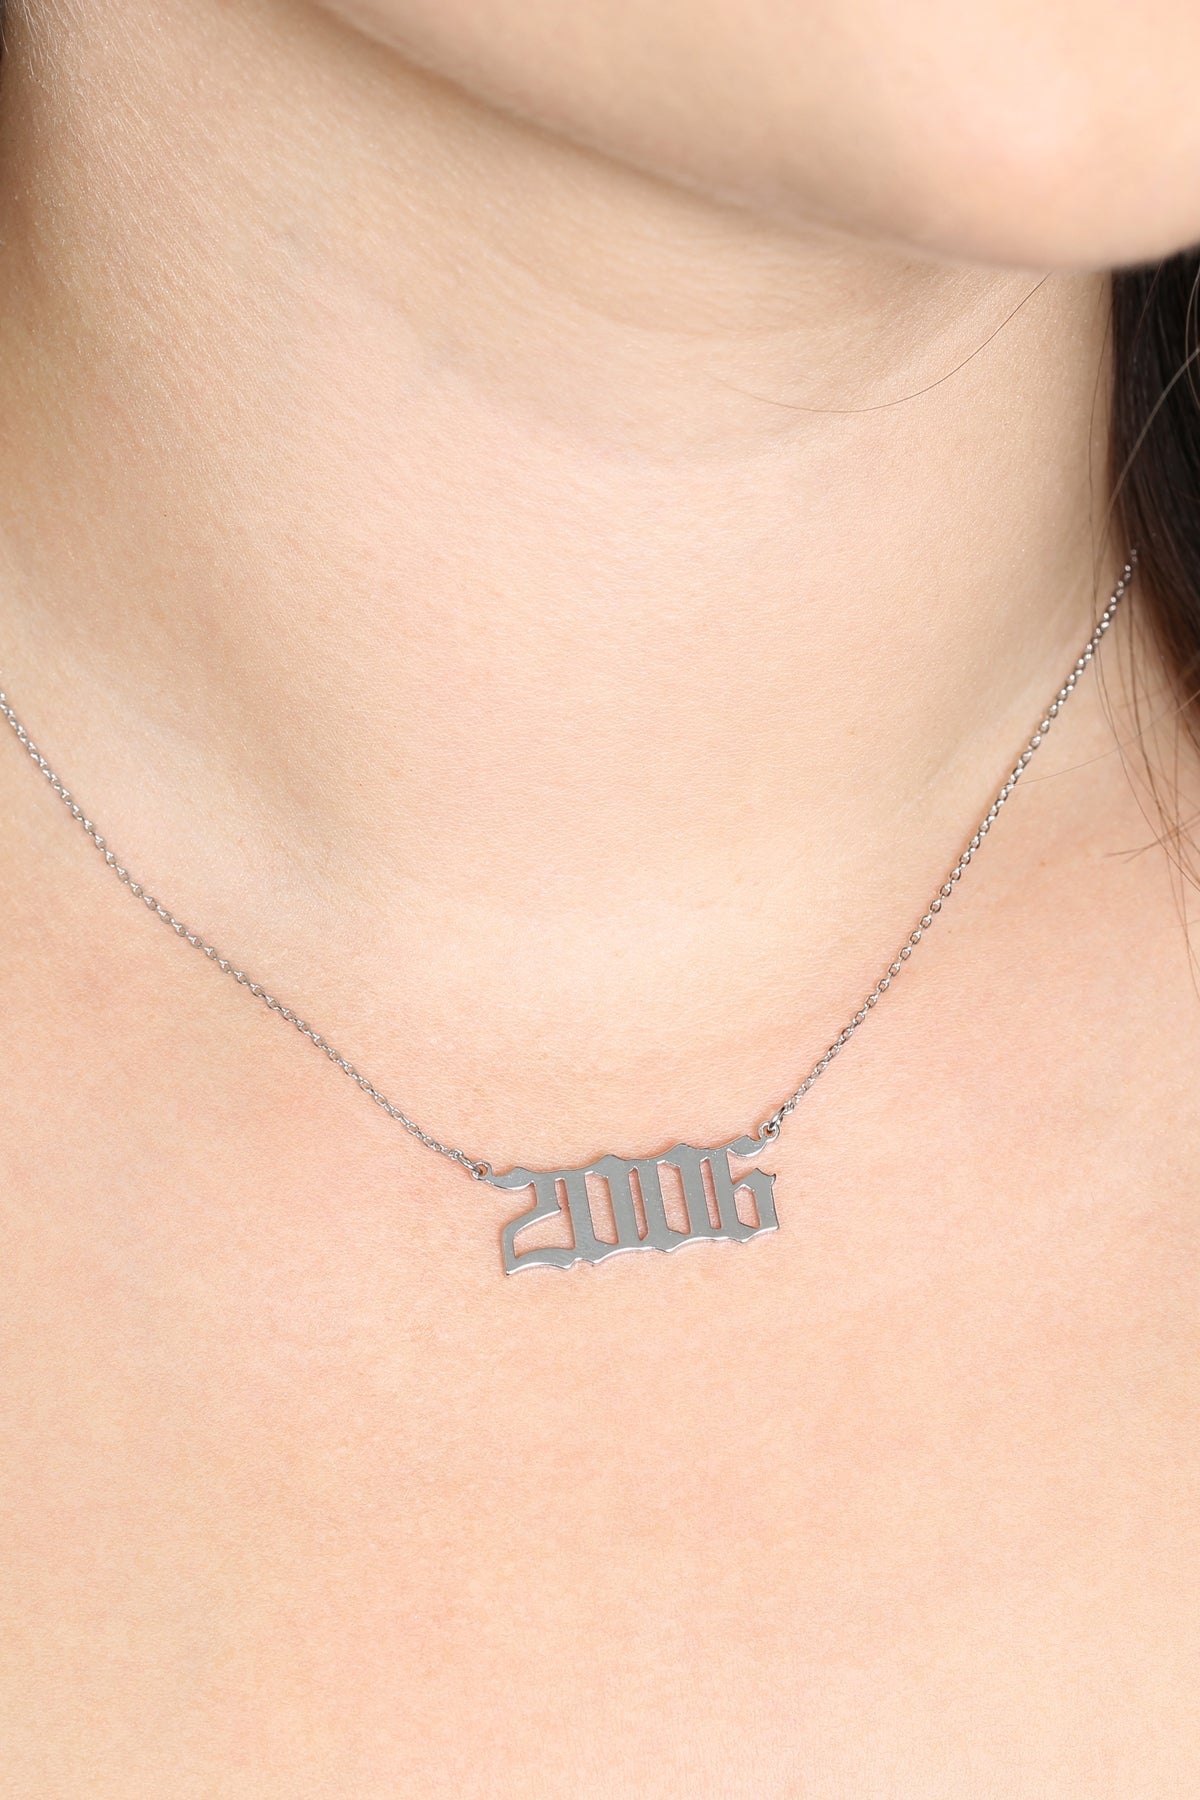 "2006" BIRTH YEAR PERSONALIZED NECKLACE